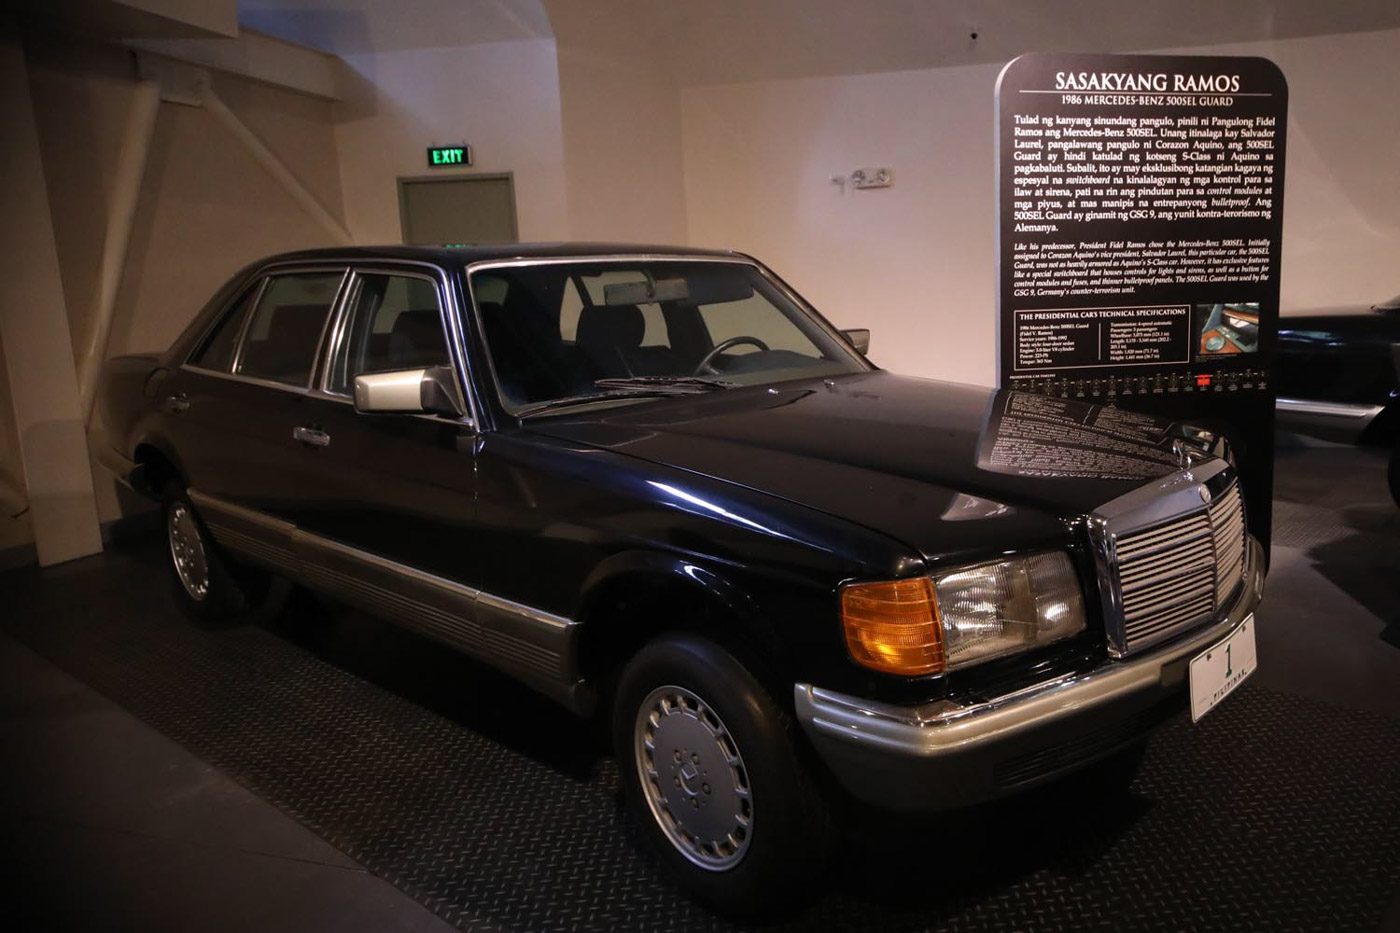 RAMOS. A 1986 Mercedes-Benz used by then president Fidel V Ramos.   